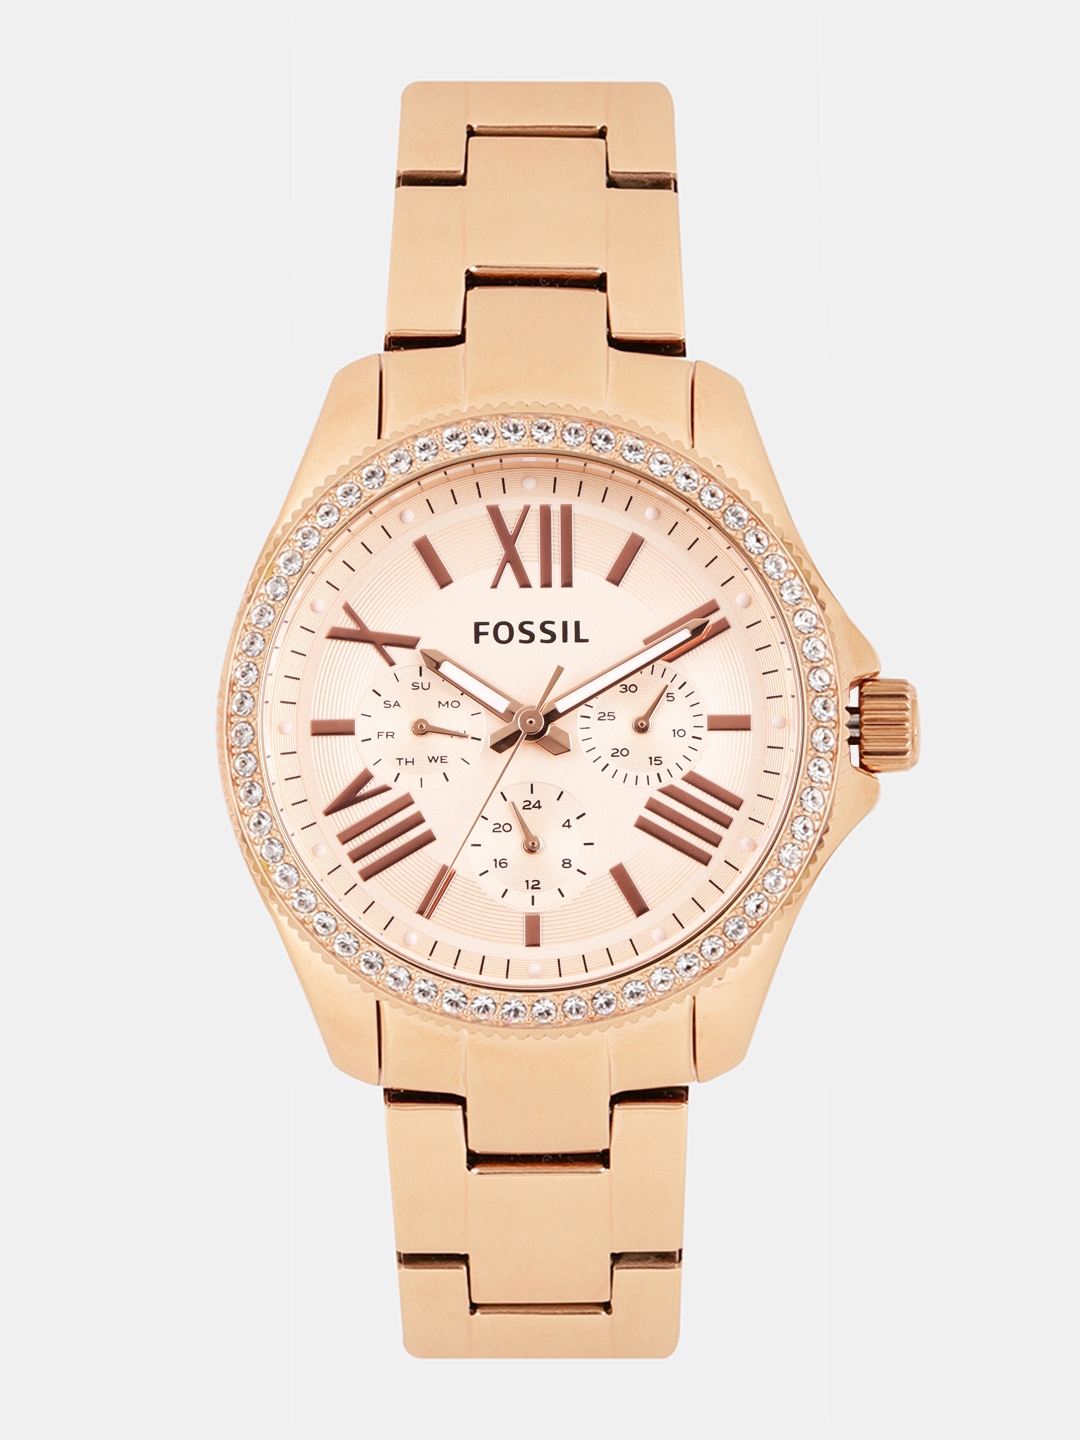 For 6322/-(45% Off) Fossil Women Rose Gold Analogue Watch AM4483 at Amazon India